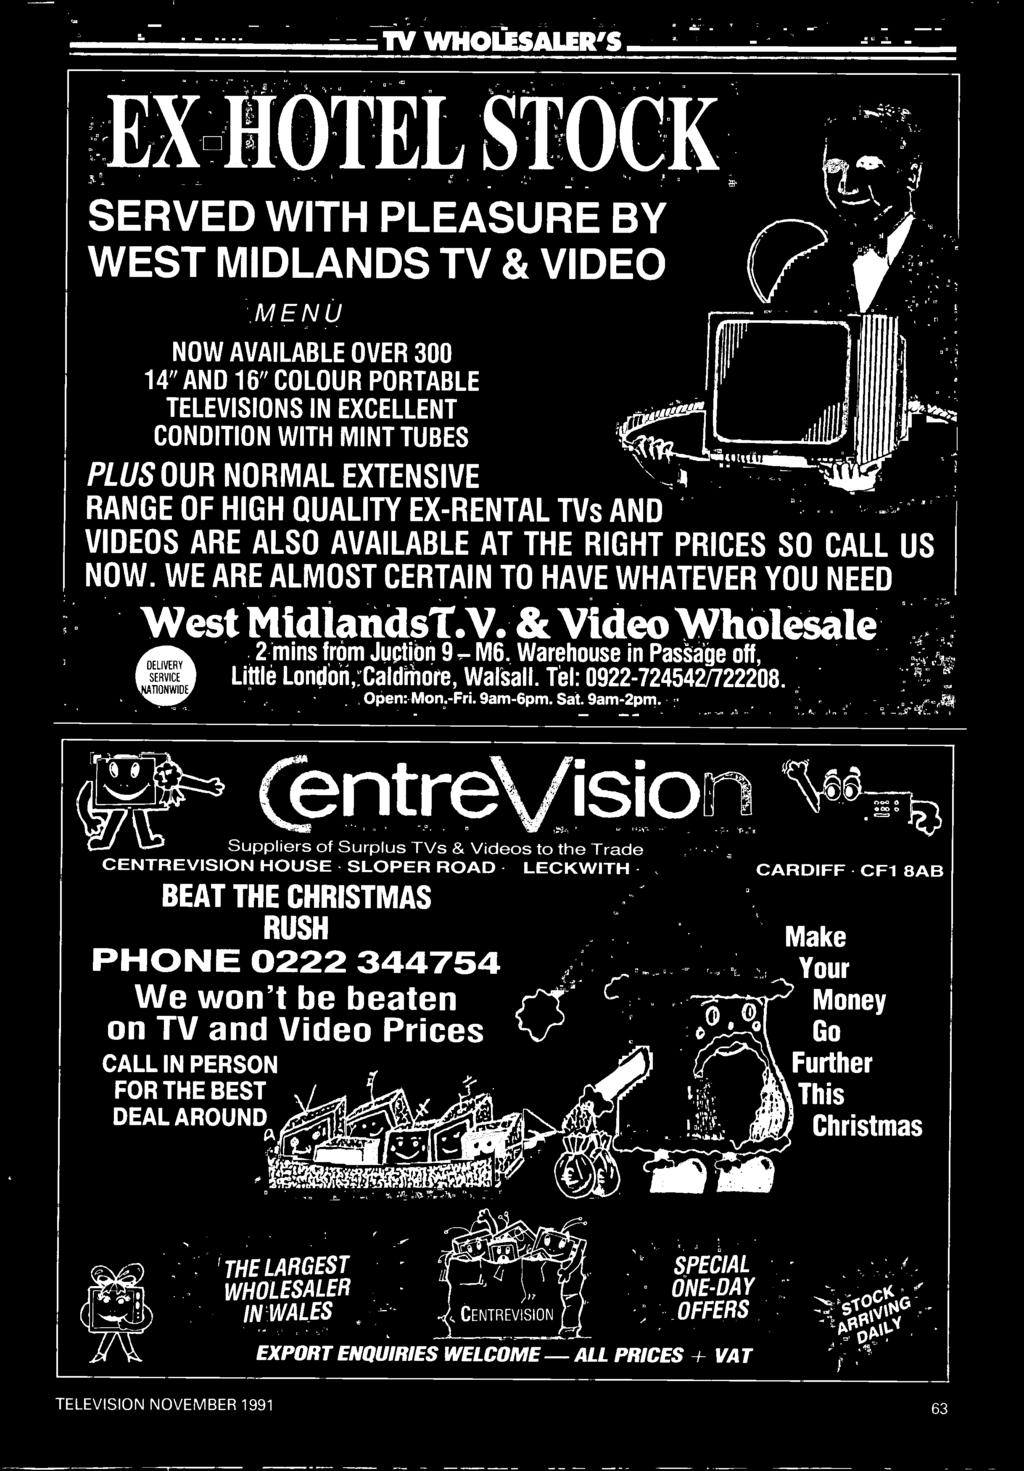 CentreVision Suppliers of Surplus TVs & Videos to the Trade CENTREVISION HOUSE - SLOPER ROAD - LECKWITH BEAT THE CHRISTMAS RUSH PHONE 0222 344754 We won't be beaten on TV